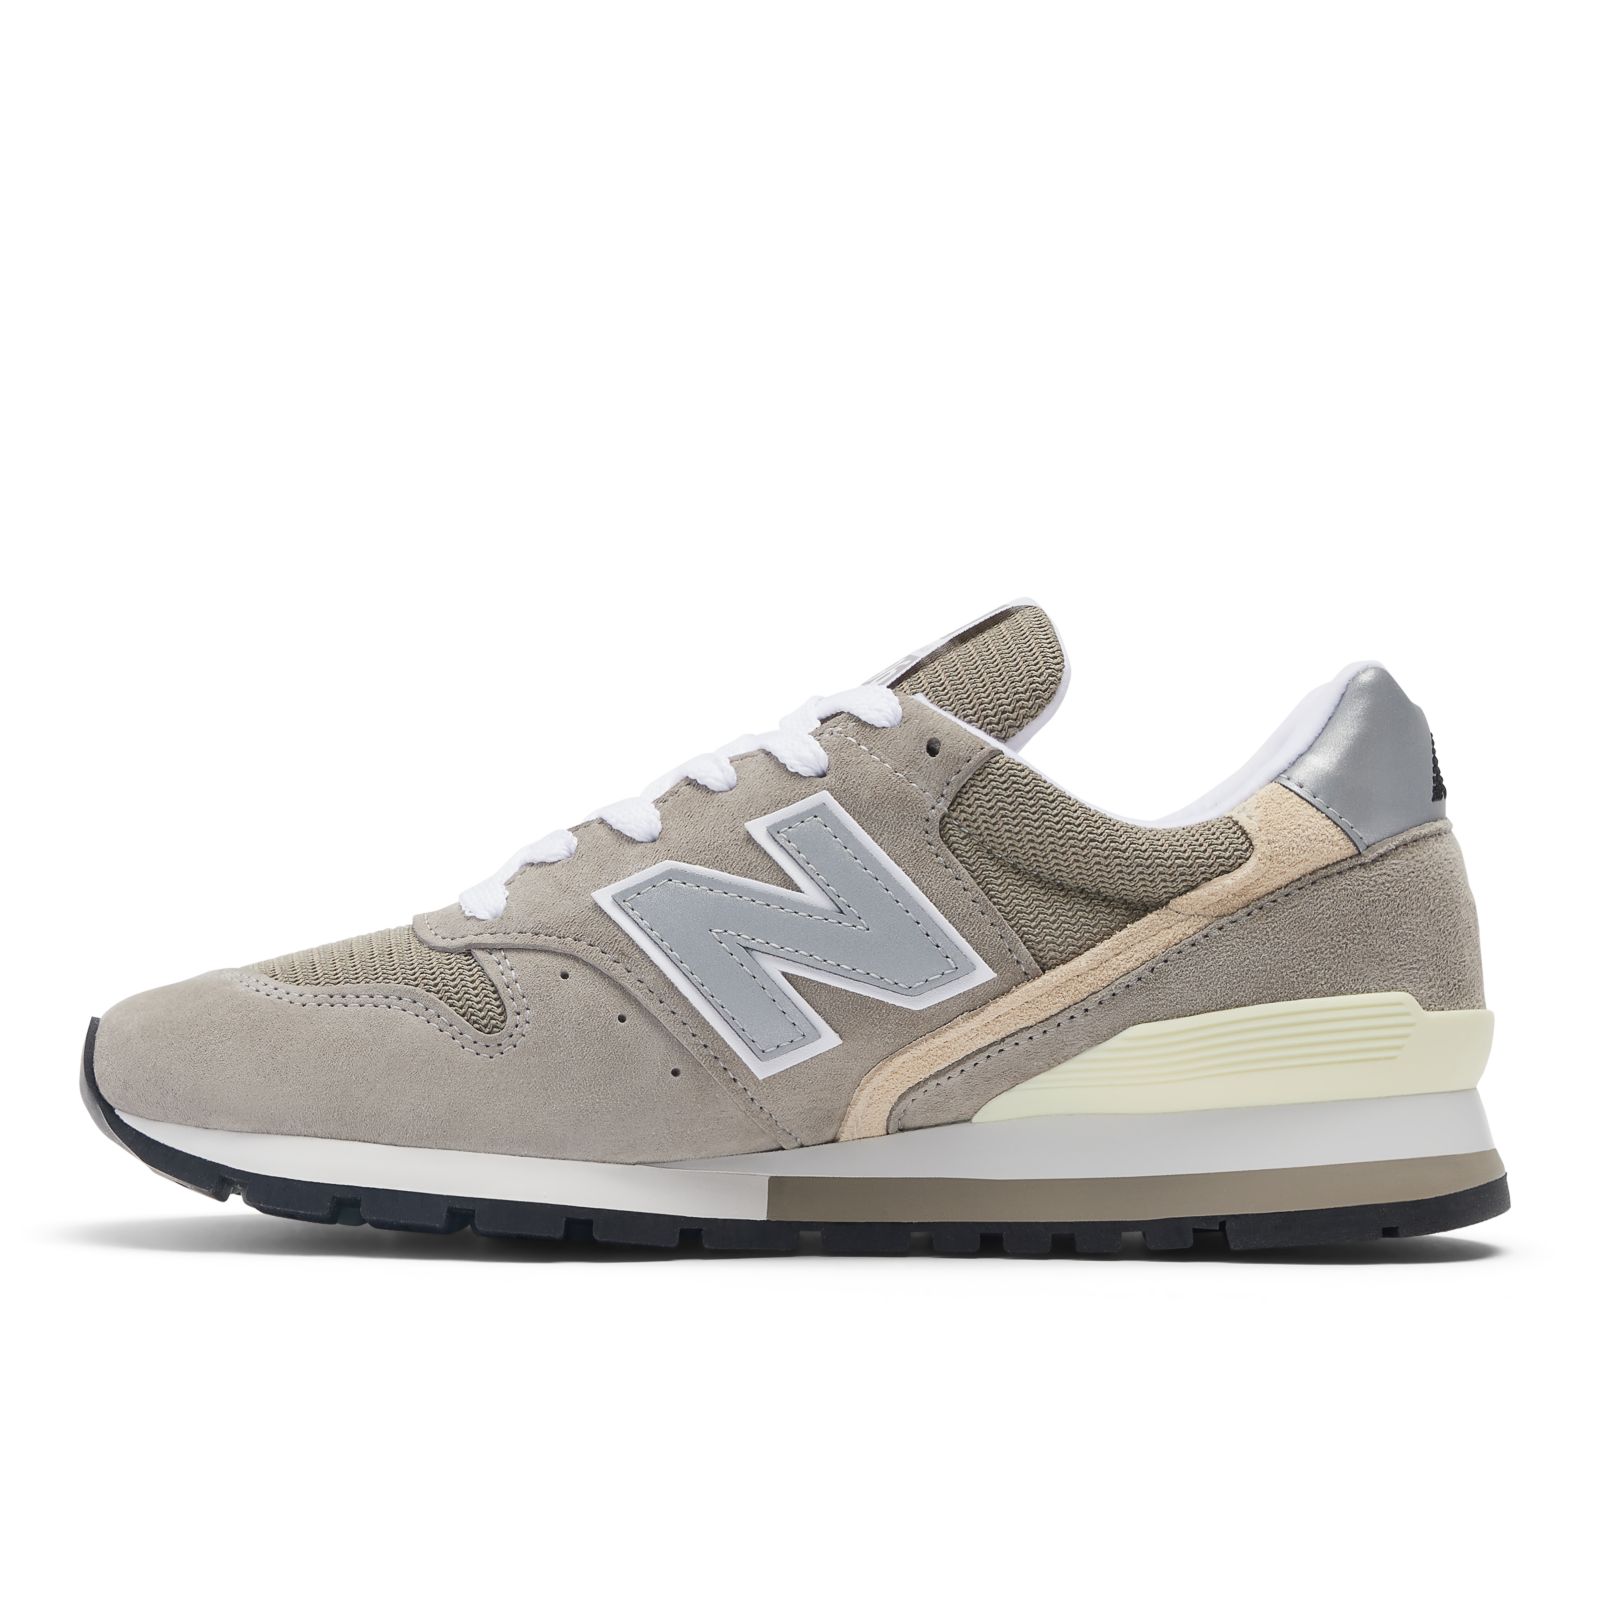 Unisex Made in USA 996 Core Shoes - New Balance